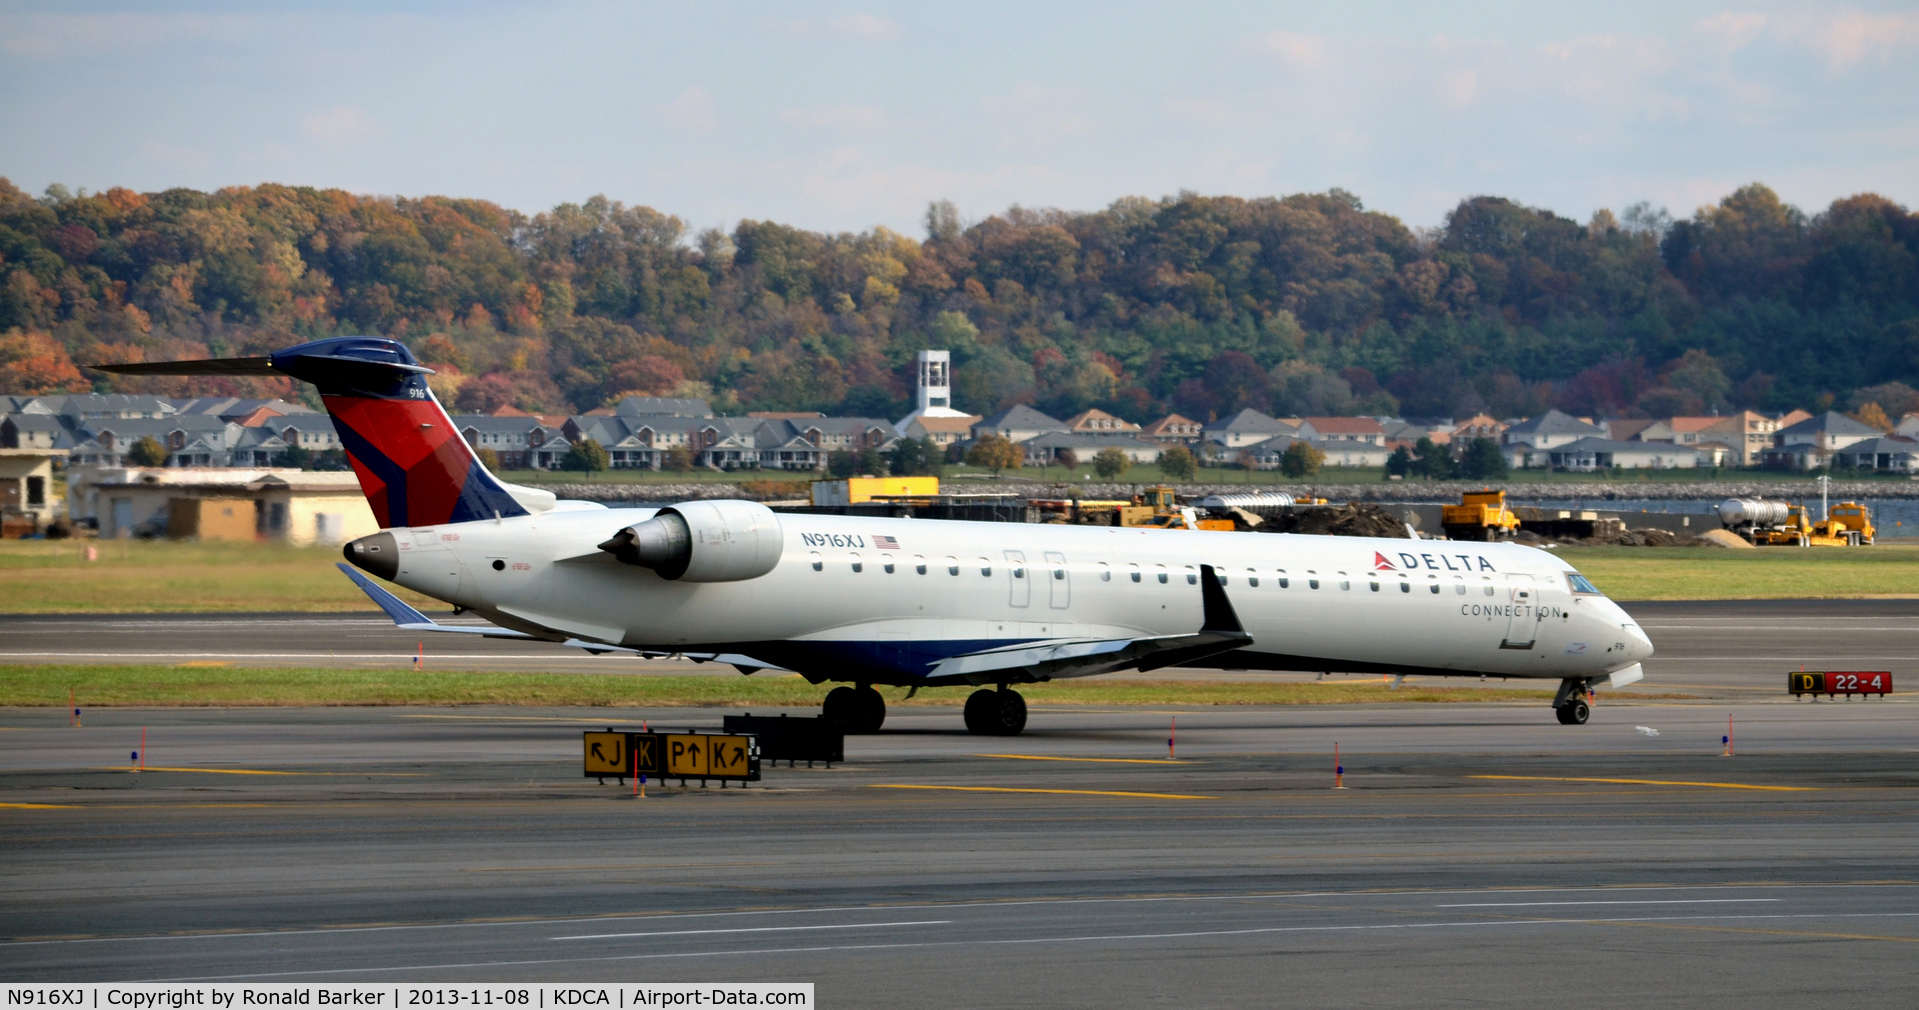 N916XJ, 2008 Bombardier CRJ-900ER (CL-600-2D24) C/N 15154, Taxi for takeoff National